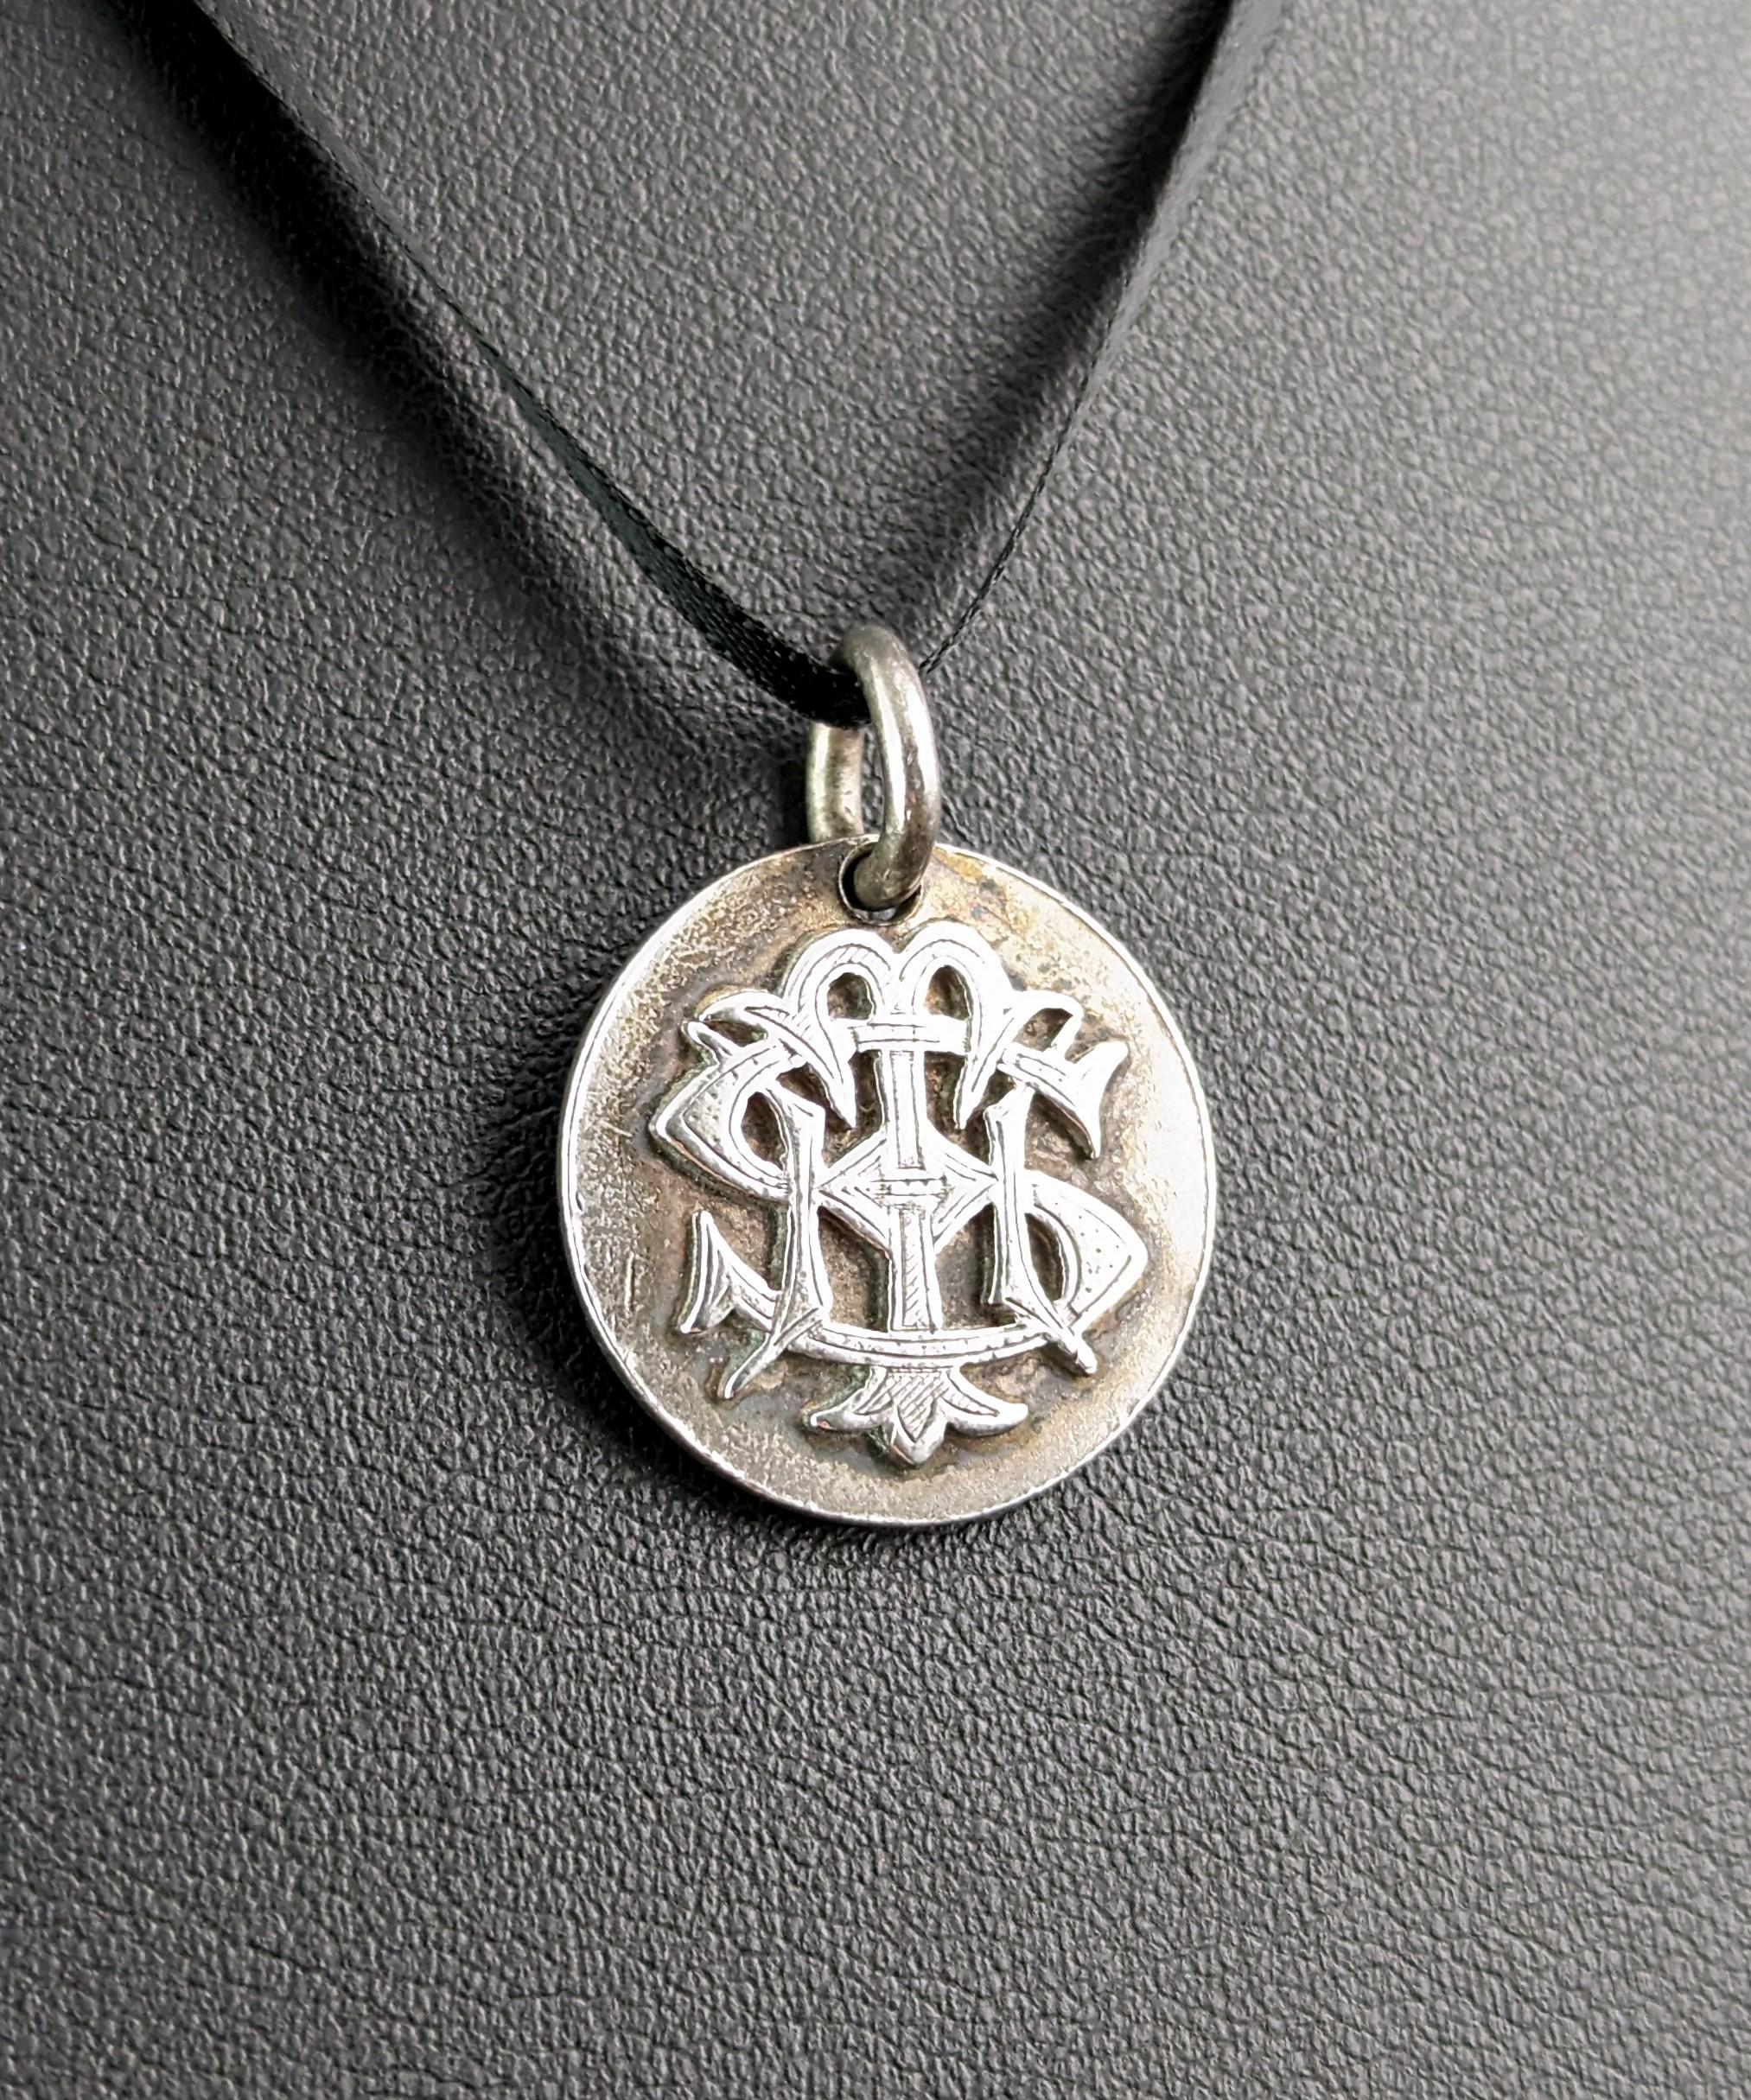 This antique Victorian era monogram pendant is interesting and unique.

Possibly adapted from a coin it has two different monograms on each side, raised in relief in gothic script.

One side reads CMB or any combination and the other THS.

This